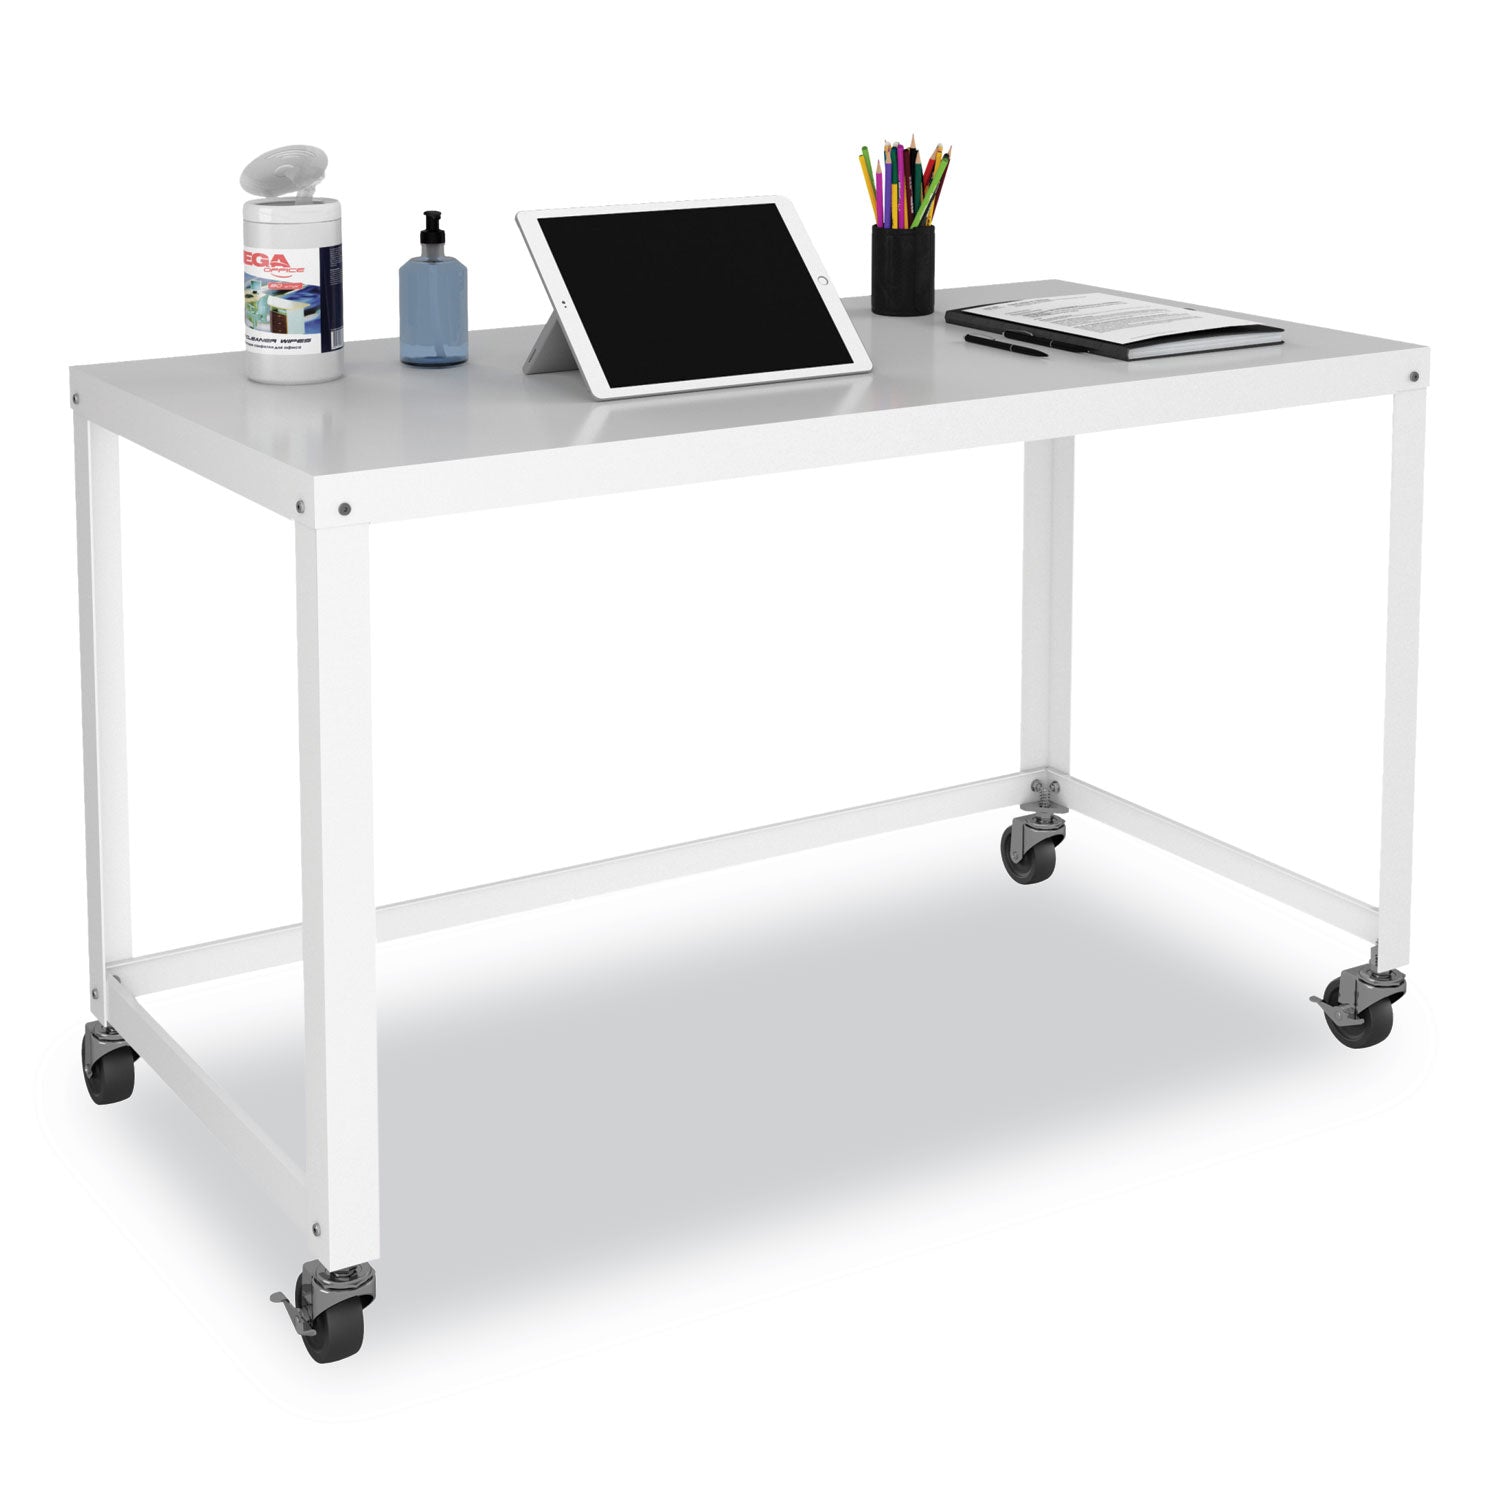 rta-mobile-desk-4745-x-2388-x-296-white-ships-in-4-6-business-days_hid21114 - 5